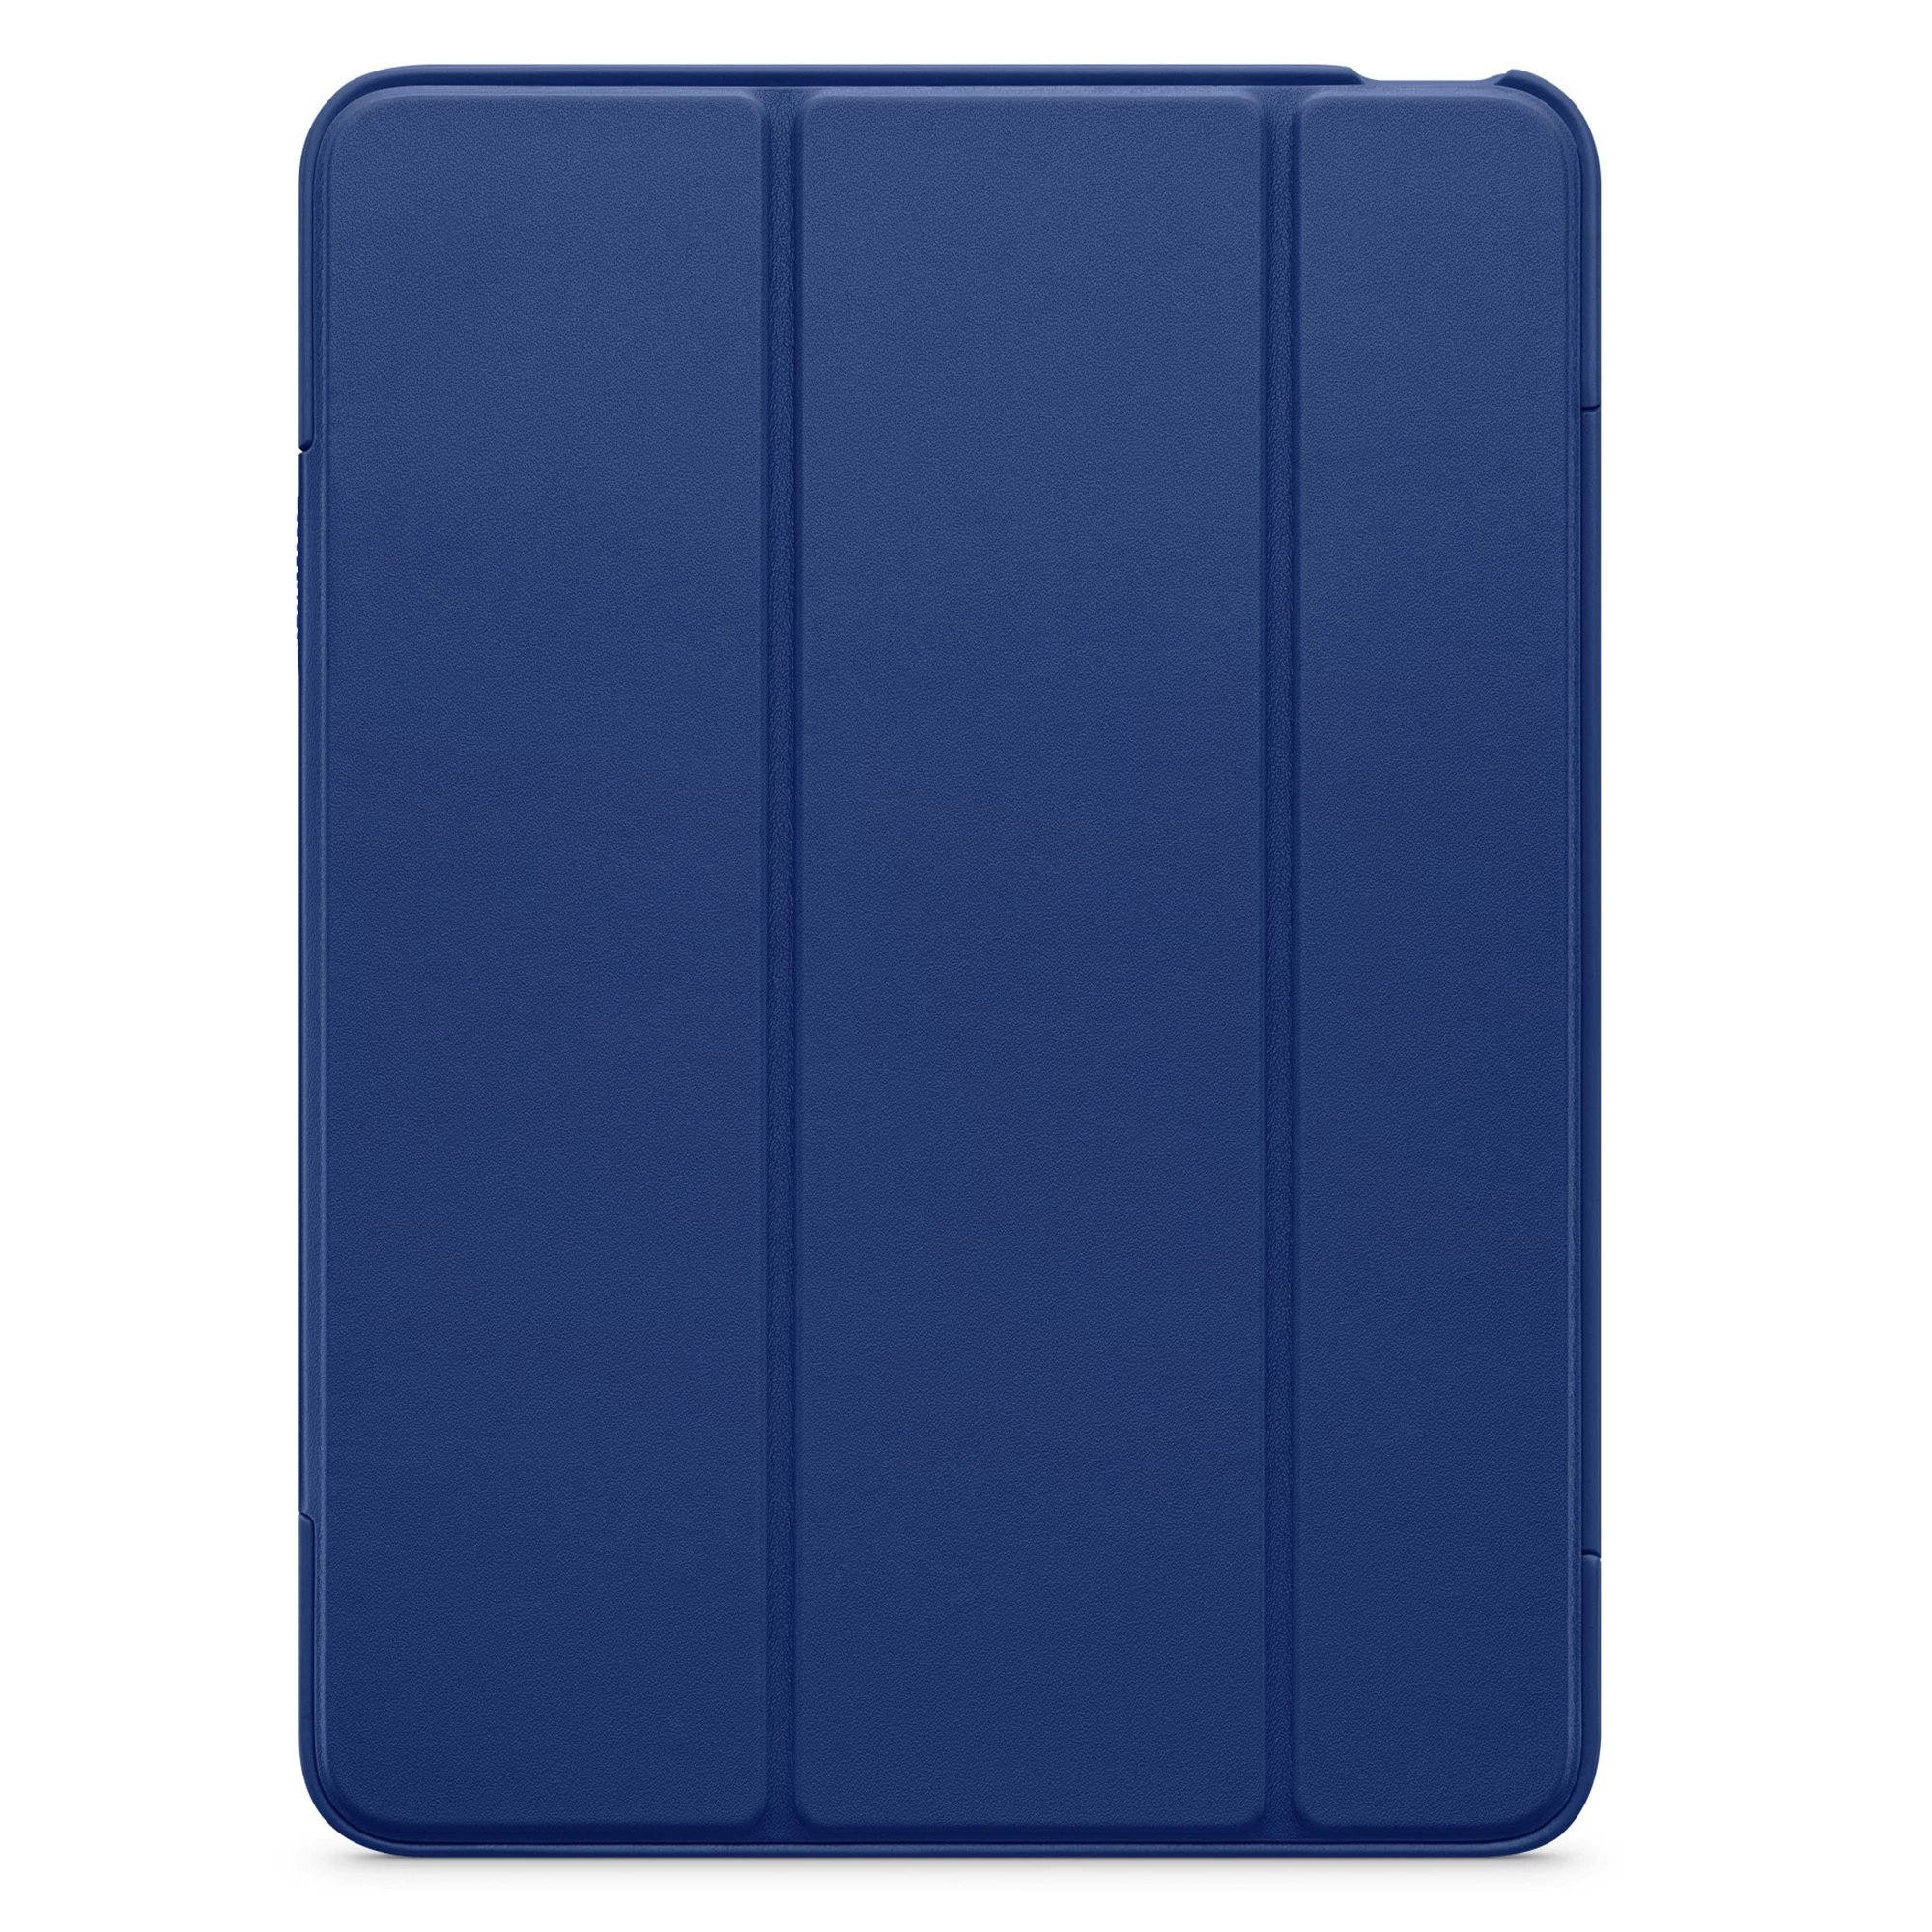 OtterBox Symmetry Series 360 Elite Case Case for iPad Air (4th and 5th generation) - Blue (HPZA2)